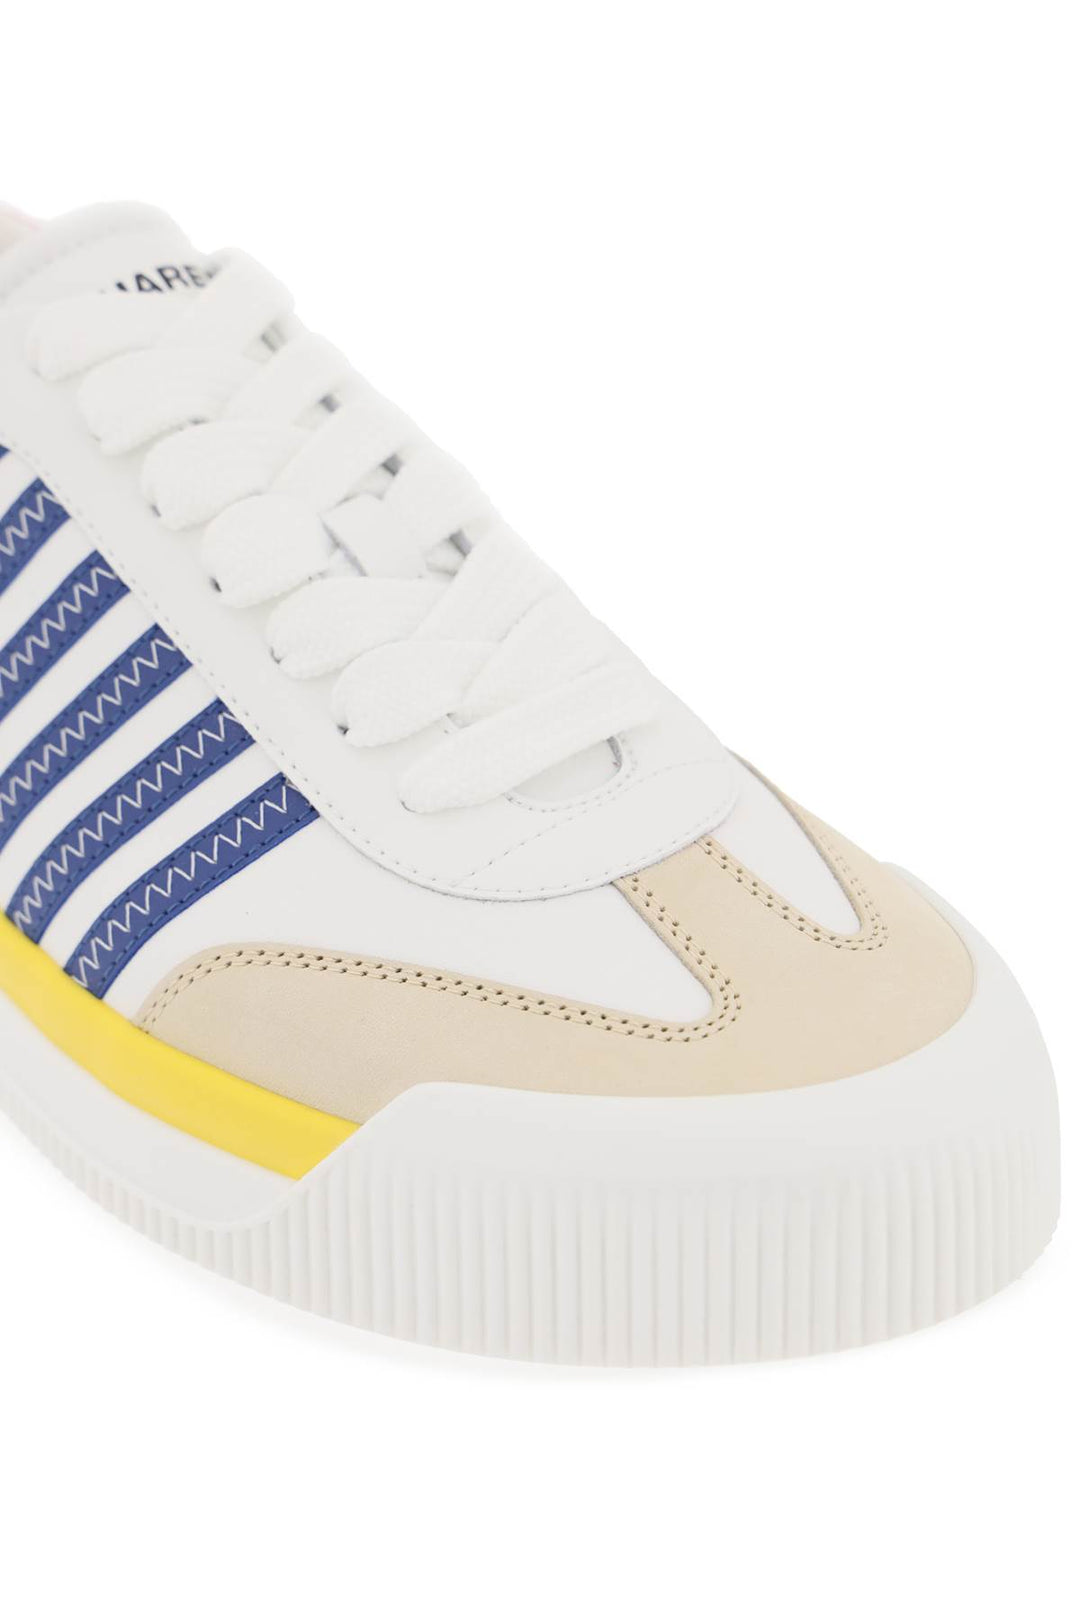 Sneakers New Jersey - Dsquared2 - Uomo